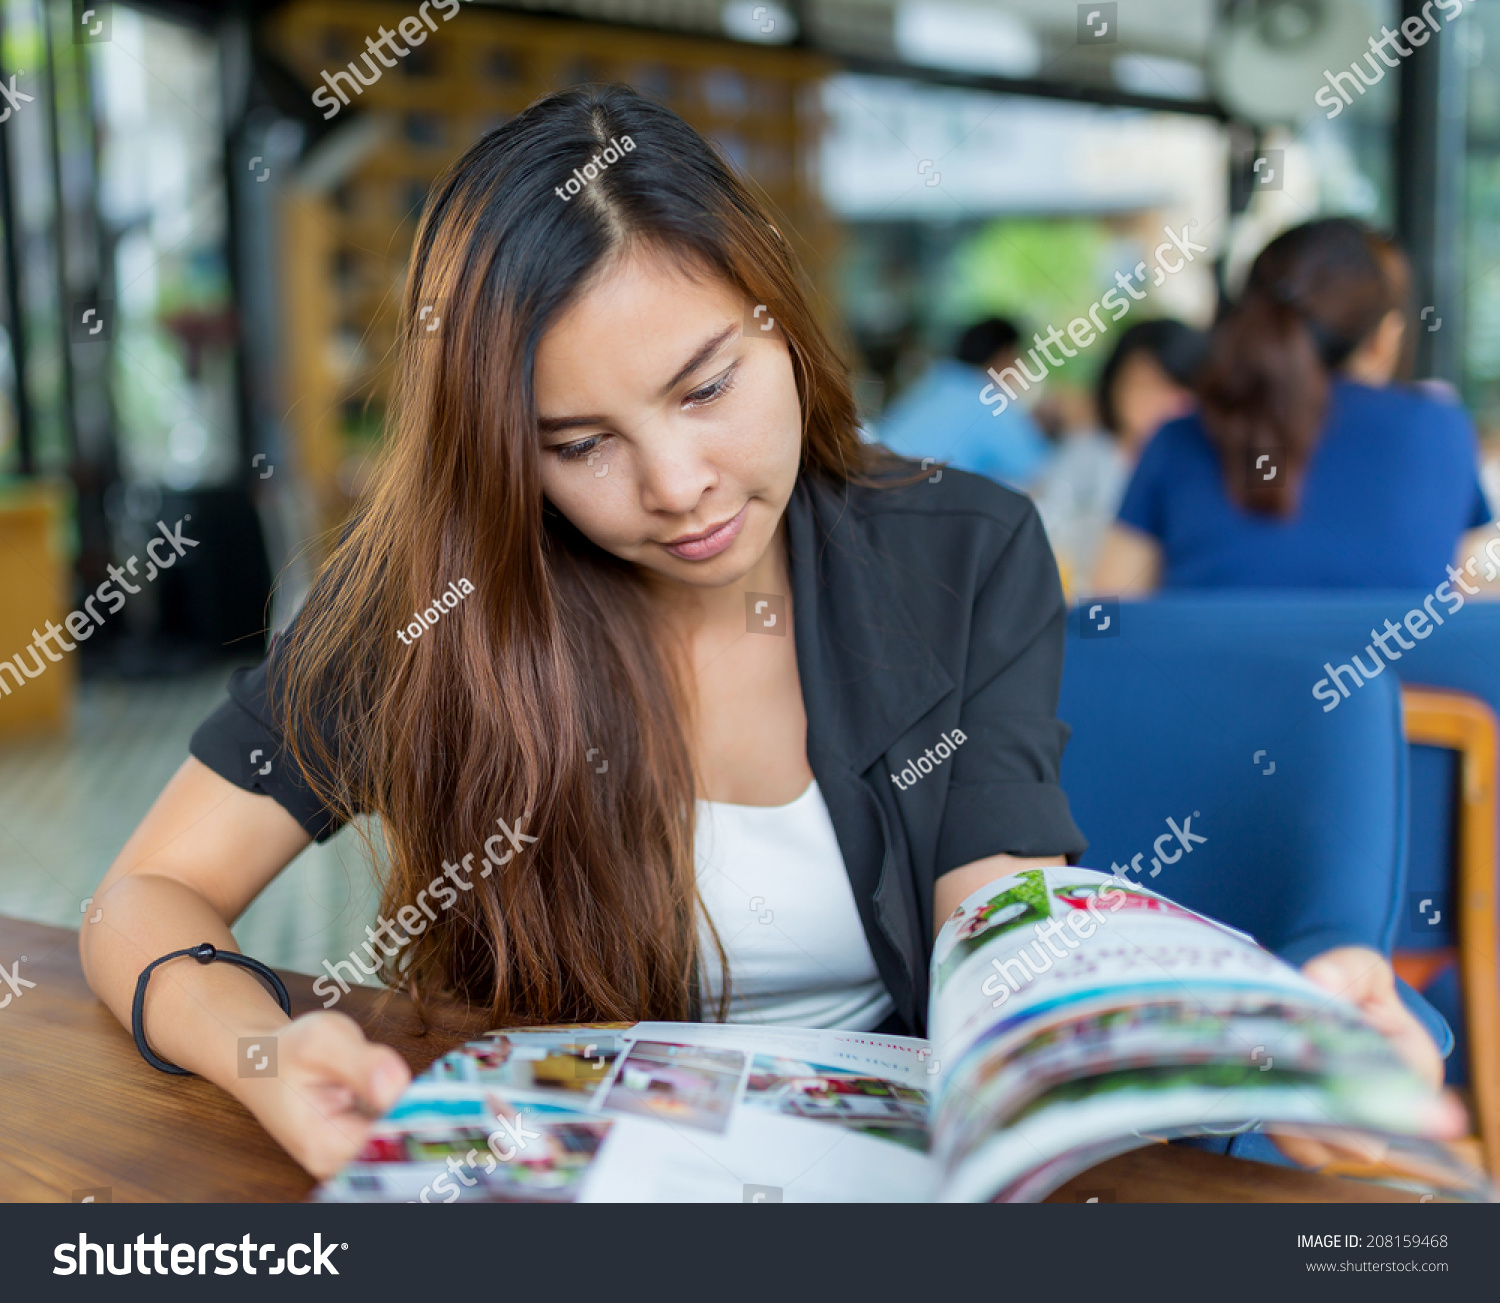 Young Asian Woman Reading Magazine Restaurant Stock Photo (Royalty ...